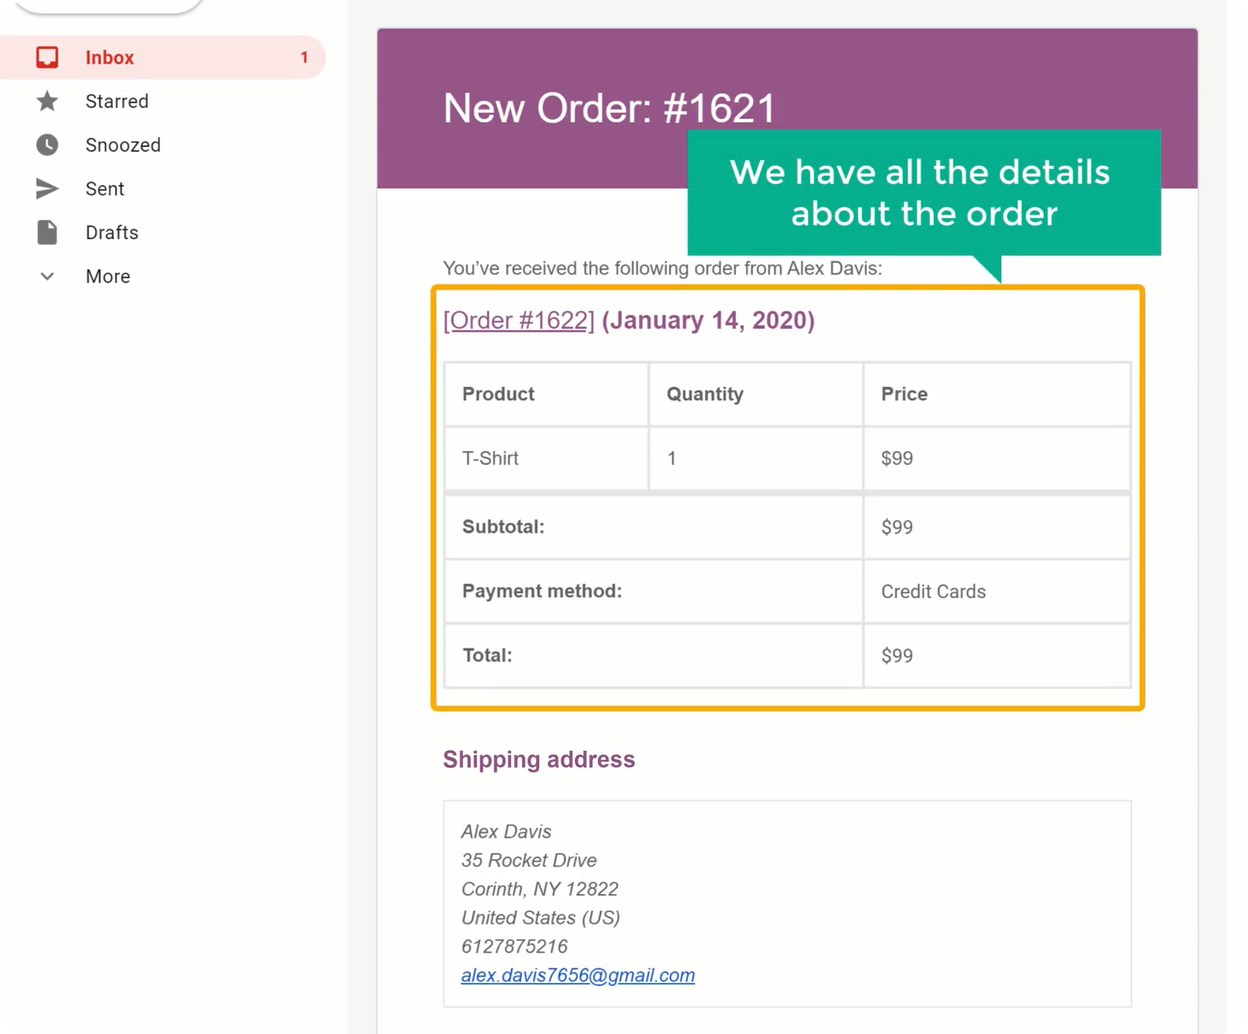 Email contains all order details